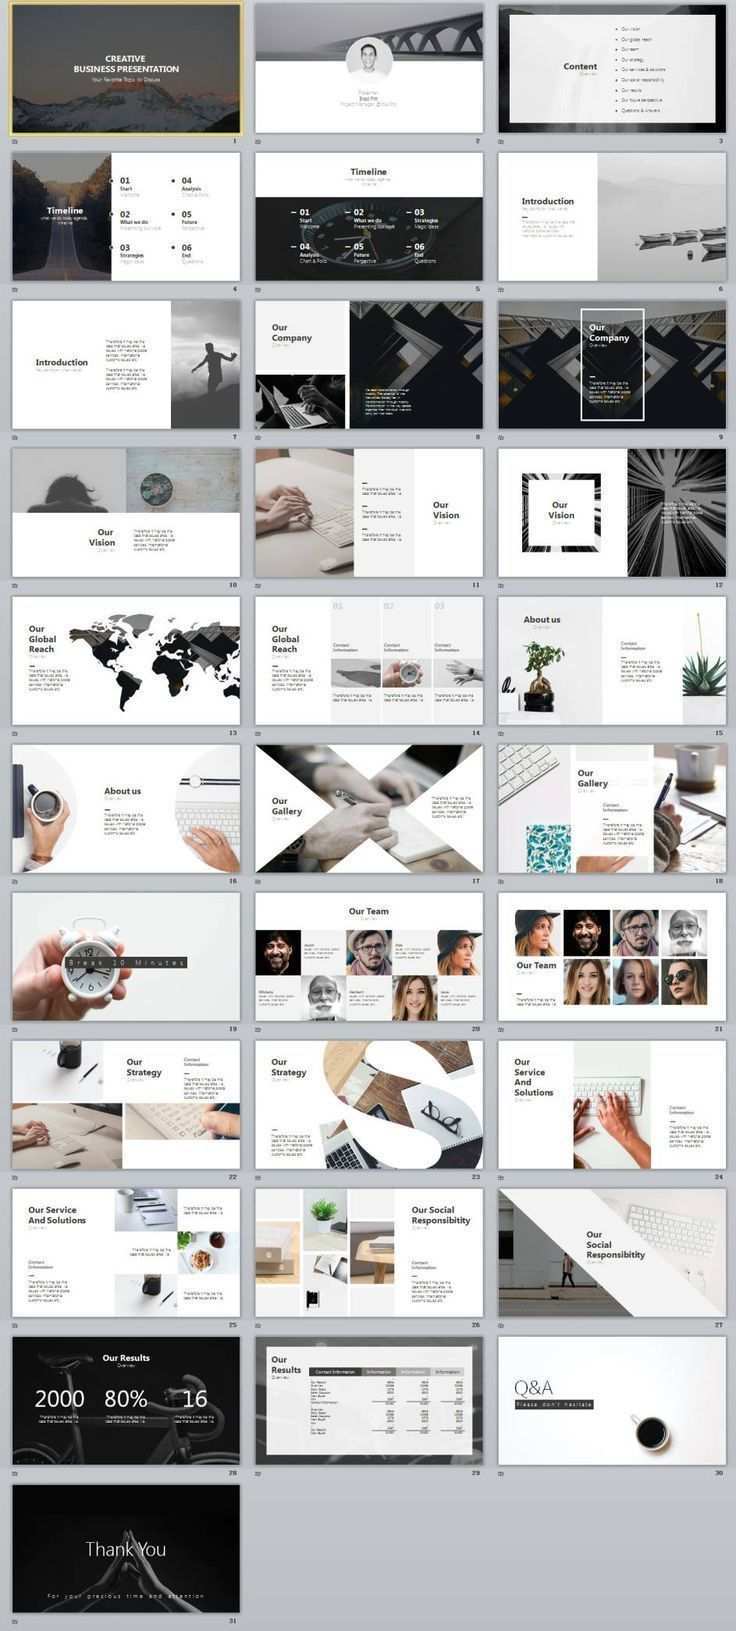 30 Gray Creative Business Design Powerpoint Templates Business Creative Design Gray Portfolio Powerpoint In 2020 Geschaftsdesign Broschure Design Power Point